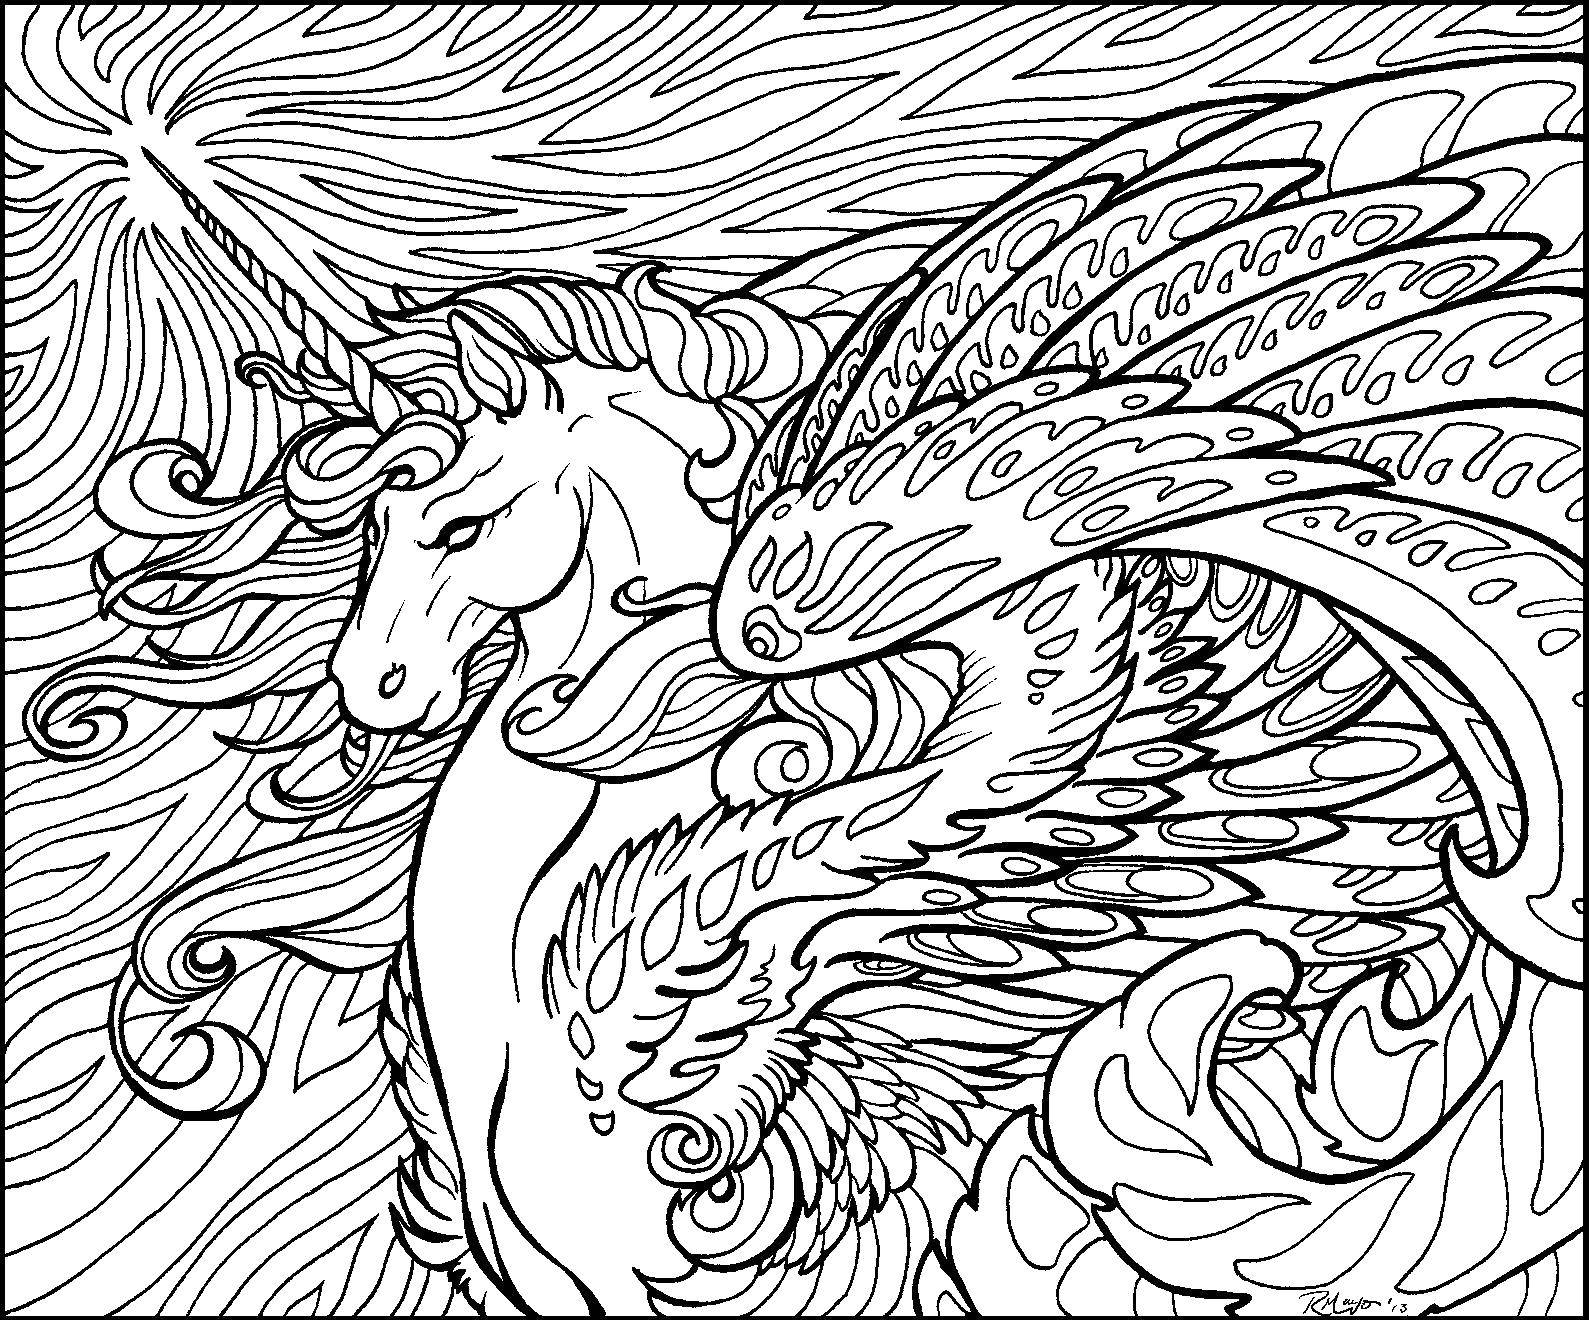 Coloring The winged unicorn and patterns. Category coloring. Tags:  unicorn, wings, tail.